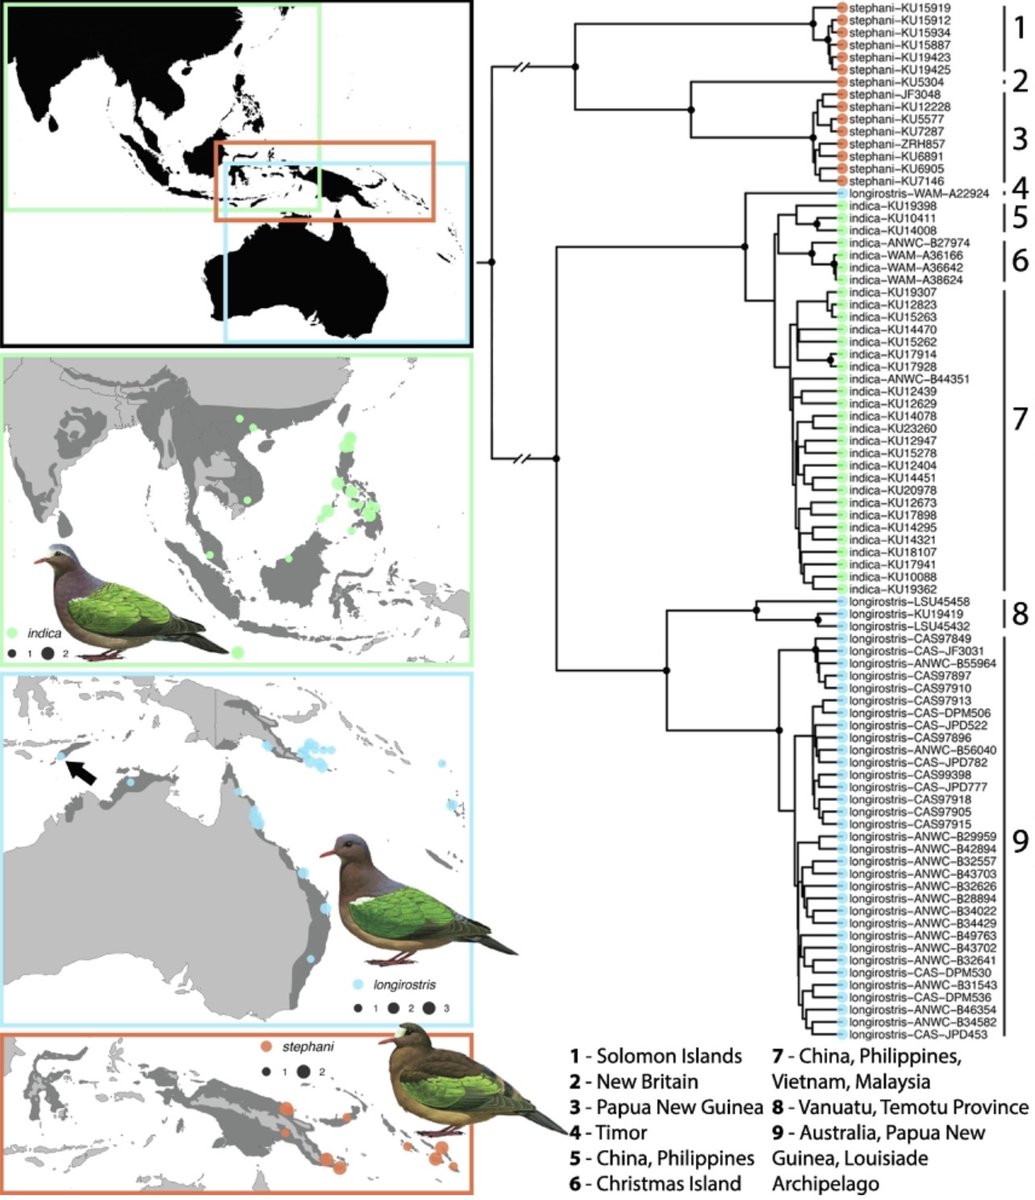 Happy to see our new paper on the phylogeography of the 𝘊𝘩𝘢𝘭𝘤𝘰𝘱𝘩𝘢𝘱𝘴 doves out and fully formatted. This share link provides free access for 50 days: authors.elsevier.com/a/1d-PP3m3nN2c…